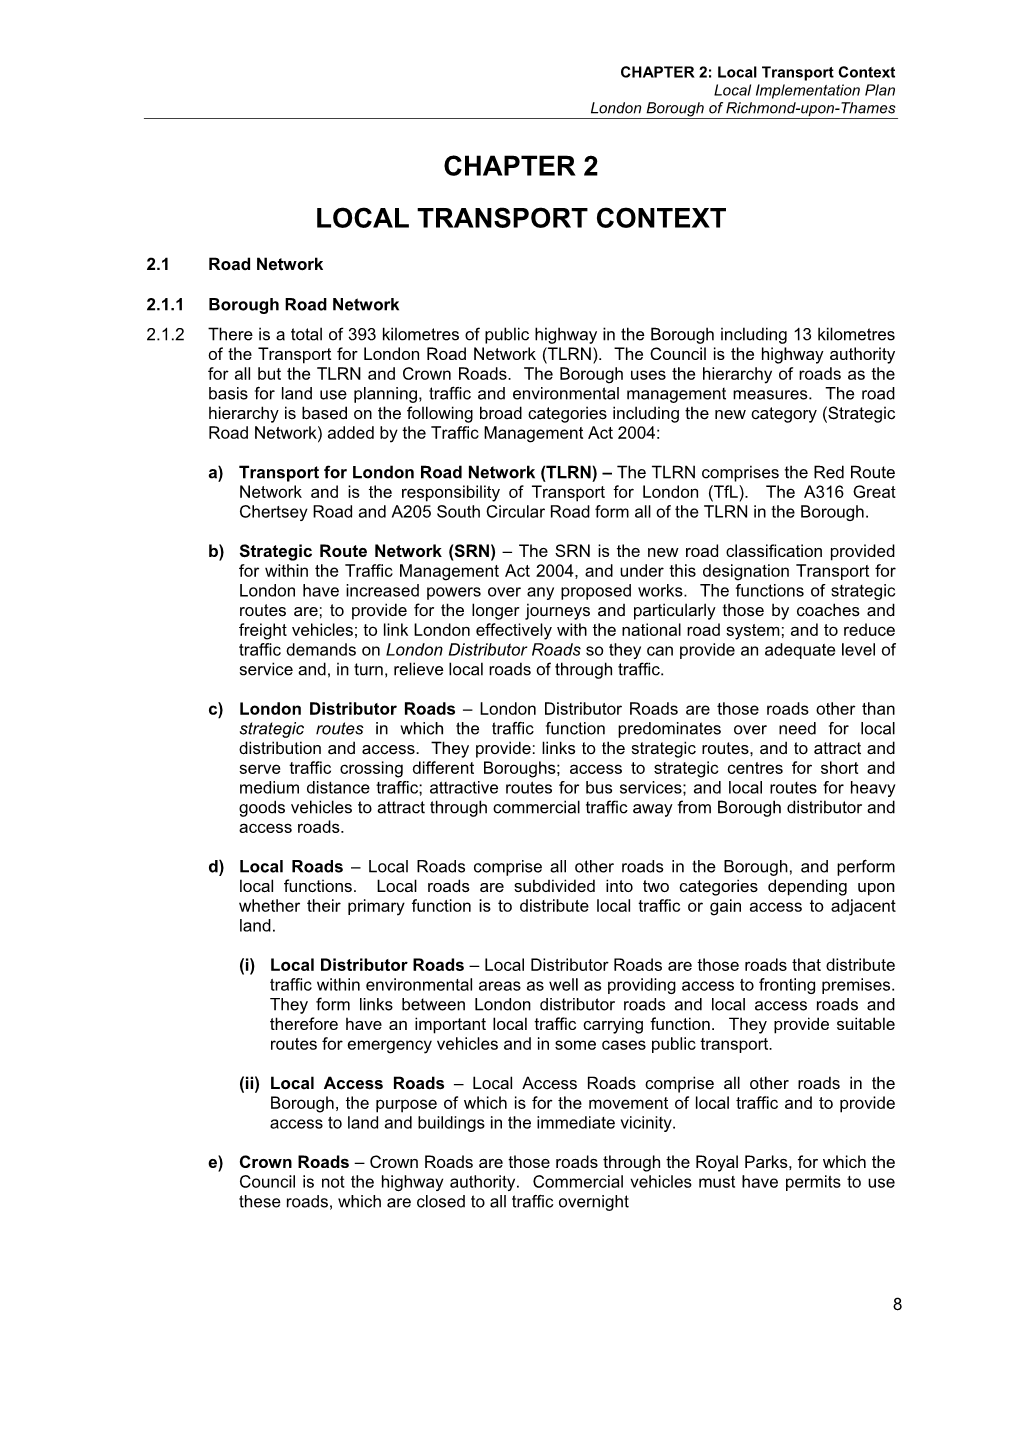 Local Transport Context Local Implementation Plan London Borough of Richmond-Upon-Thames